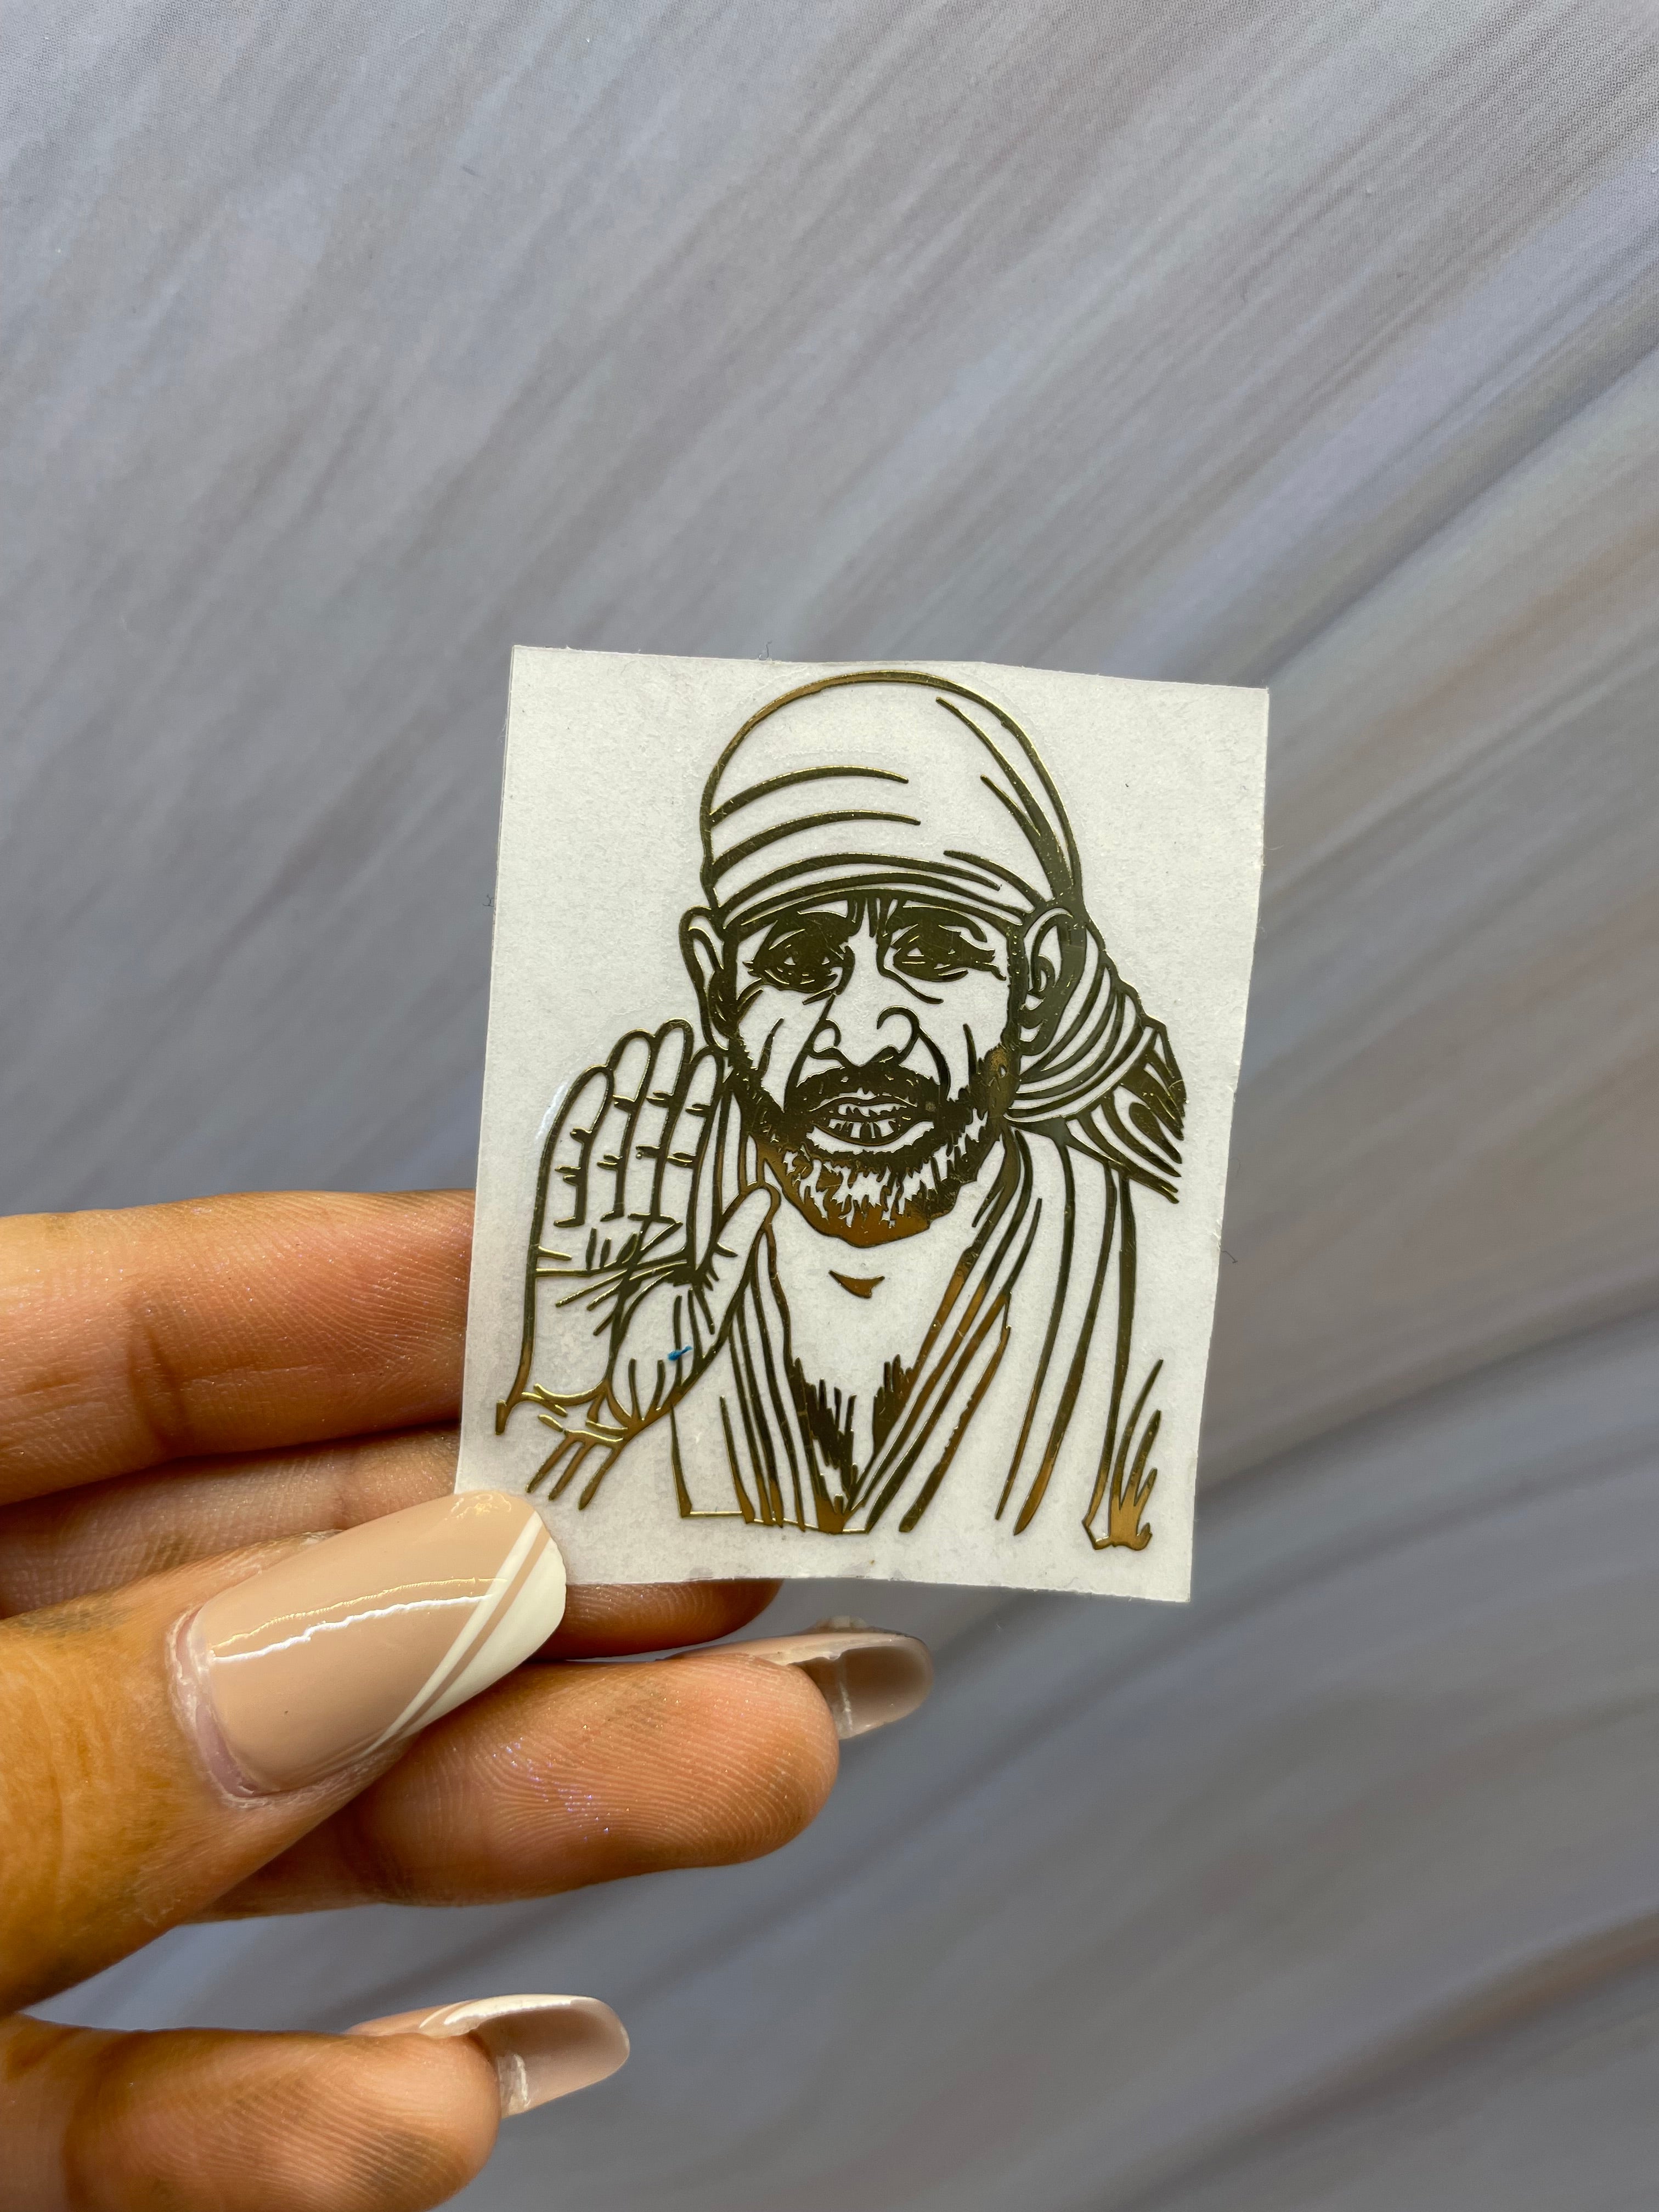 50+ Sai Baba Images in HD - Vedic Sources | Baba image, Sai baba, Portrait  sketches